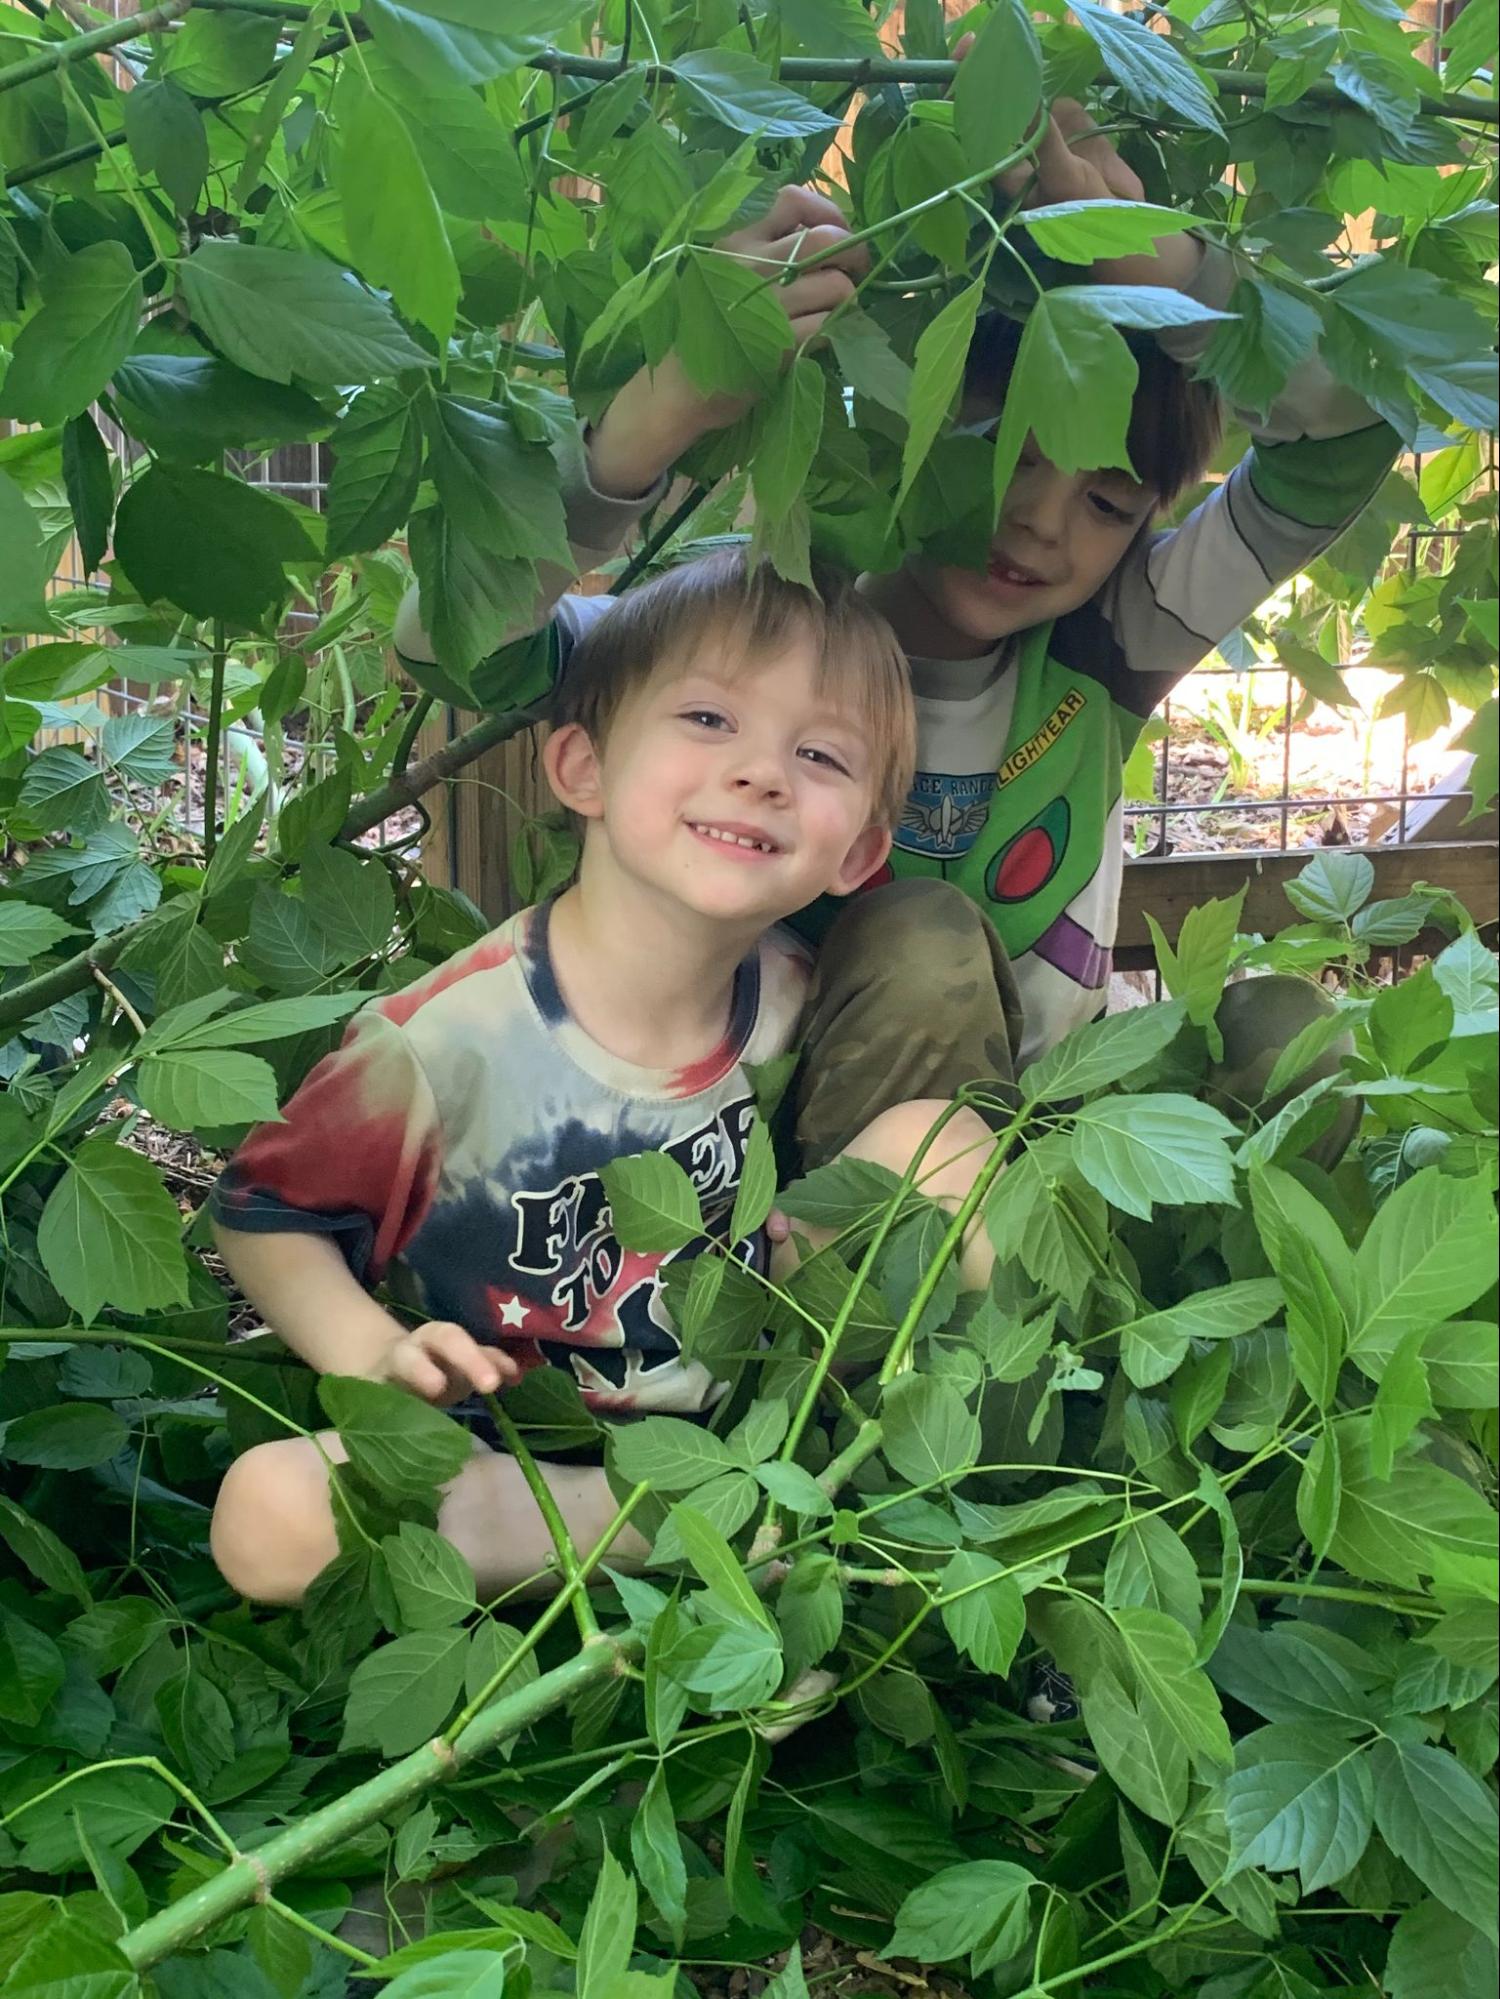 My grandsons were an integral part of designing the Secret Garden, seen here creating a fort with cut branches of a Box Elder tree. 